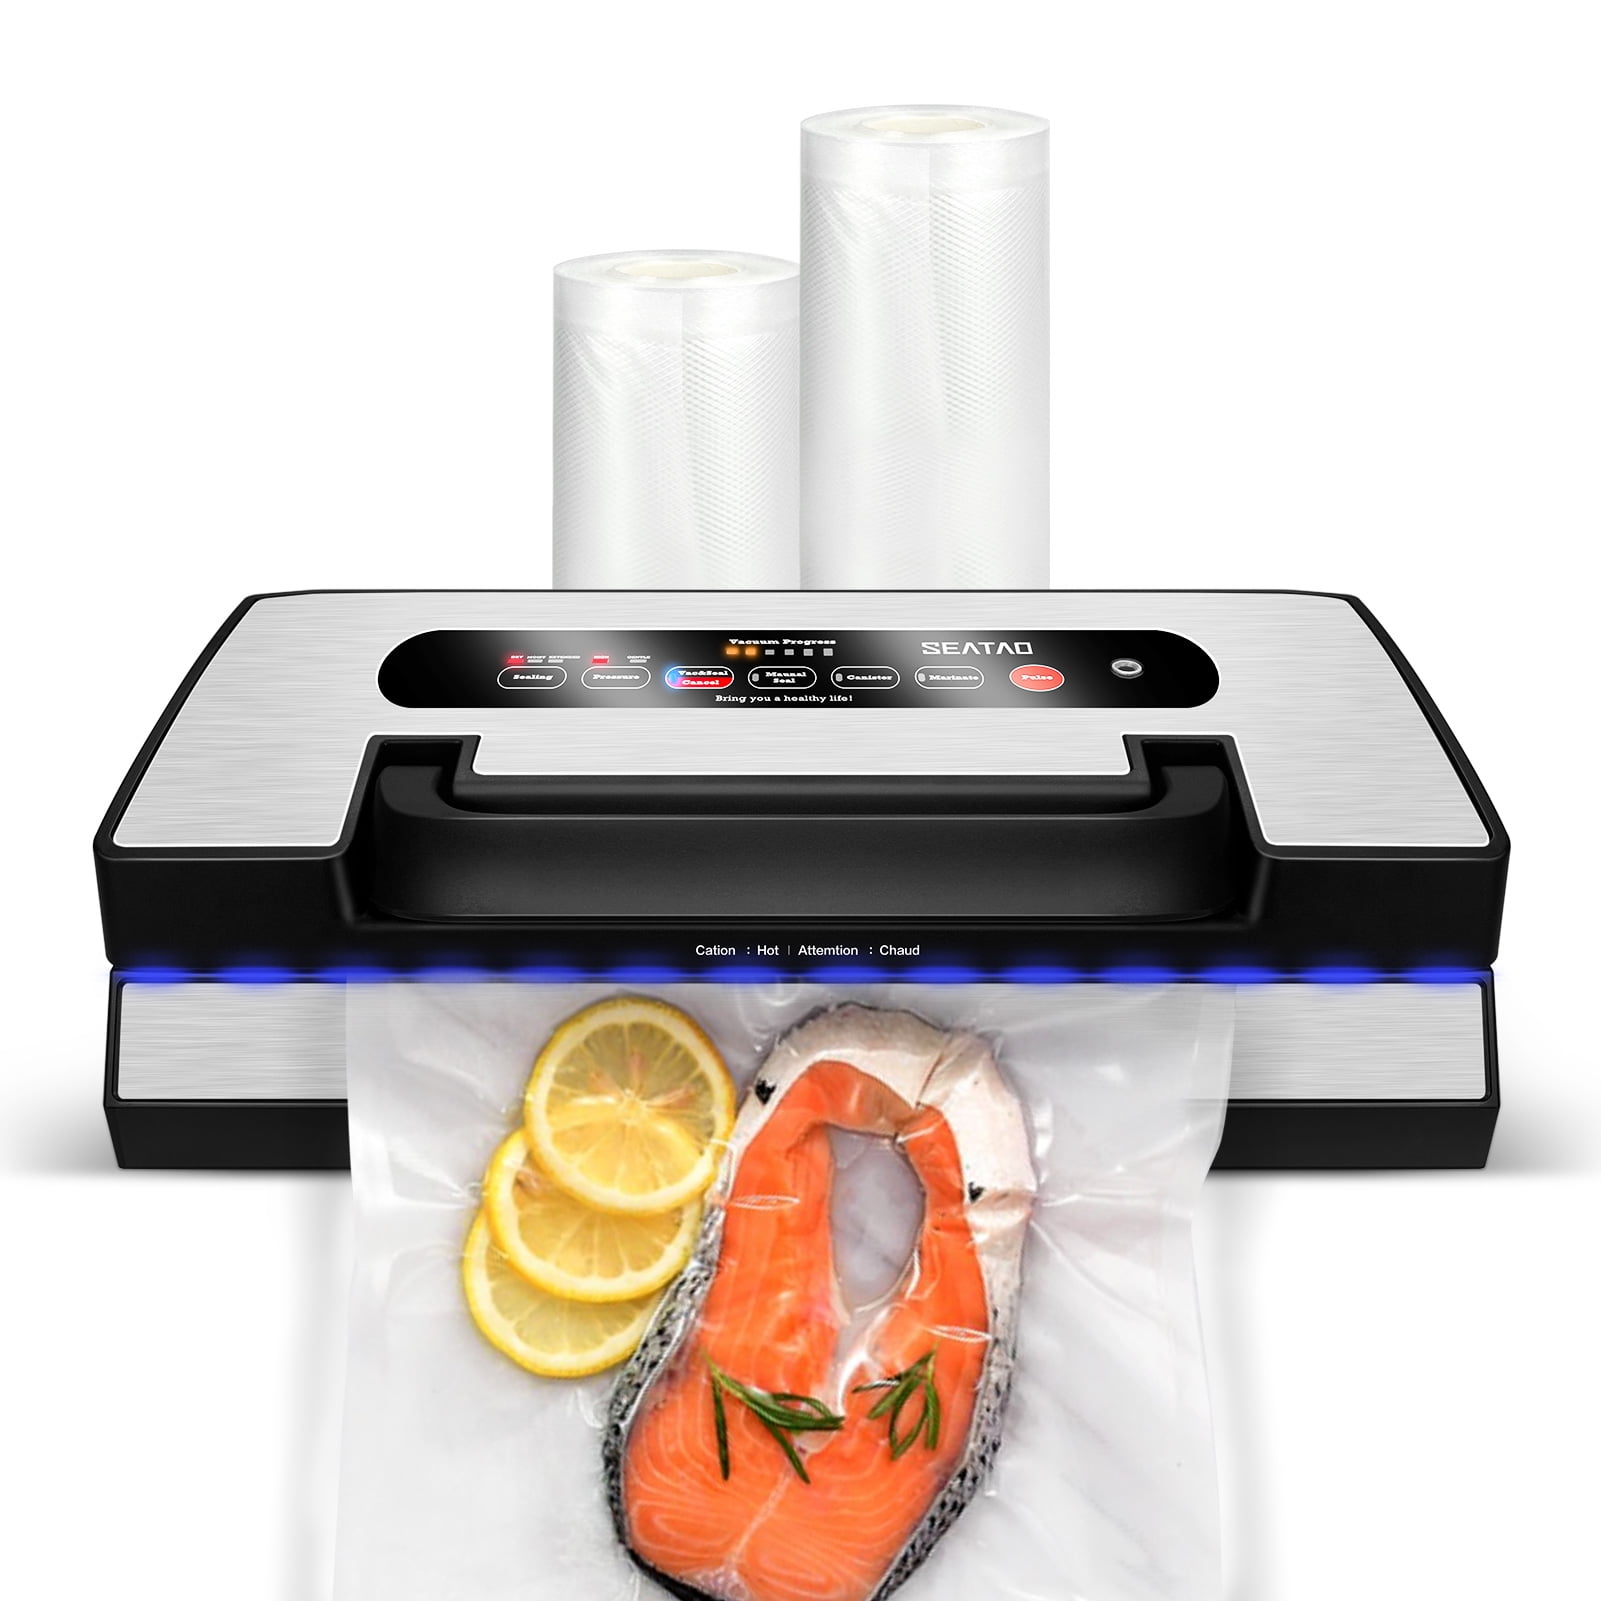  Bemkop Kitchen Vacuum Sealer Machine,Automatic Food Vacuum  Sealer with Moist/Dry Modes for Food Storage and Sous Vide (AP-18): Home &  Kitchen